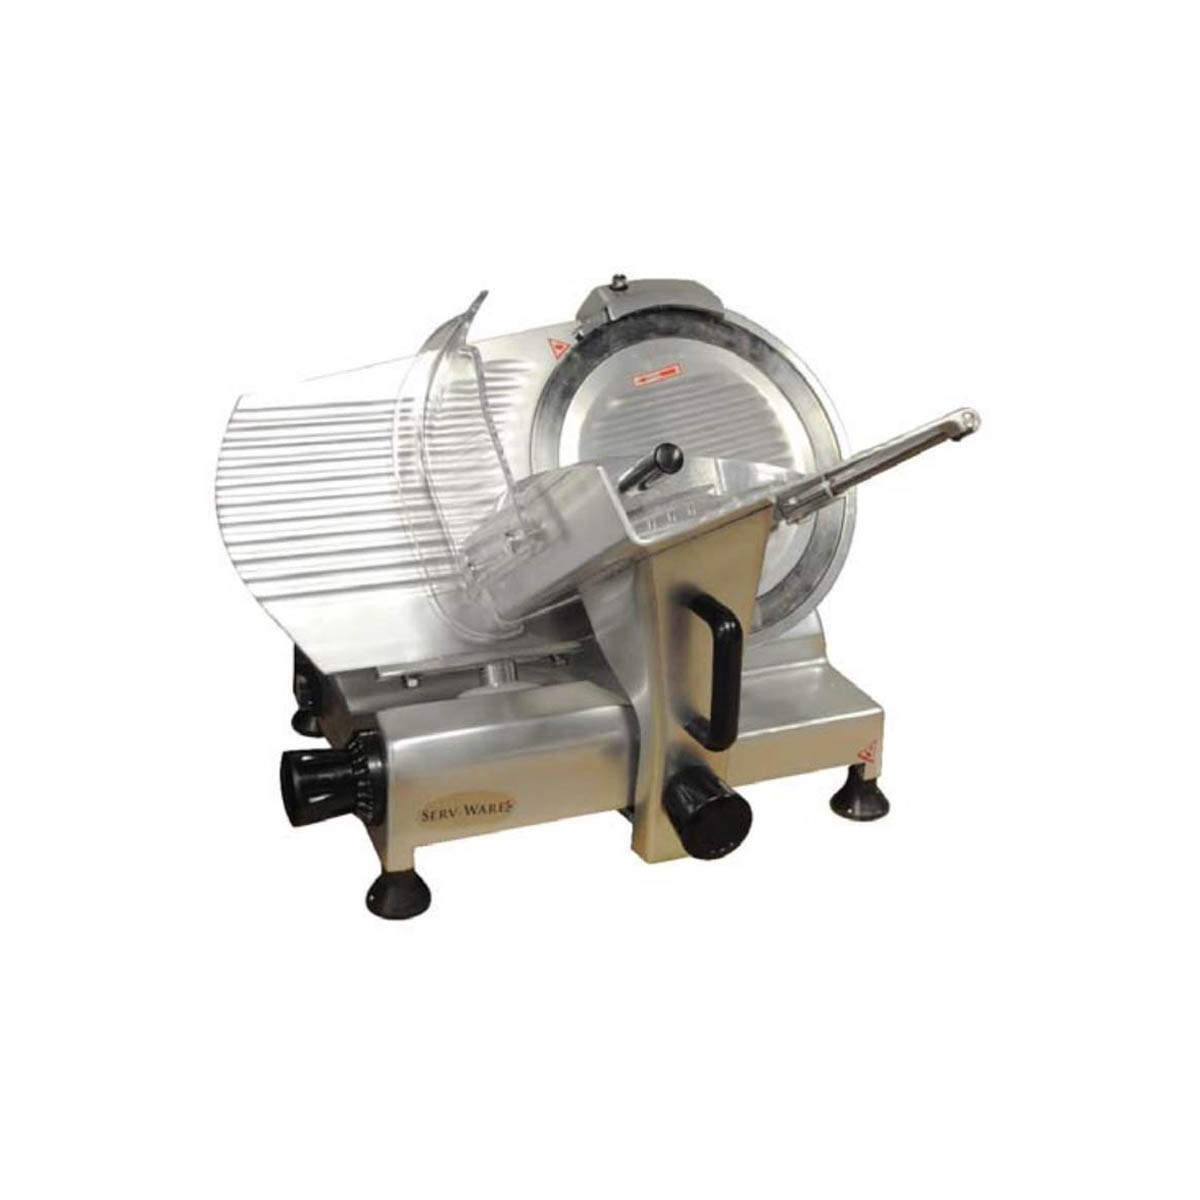 Serv-Ware SLC-12 Manual Feed Food Slicer with 12